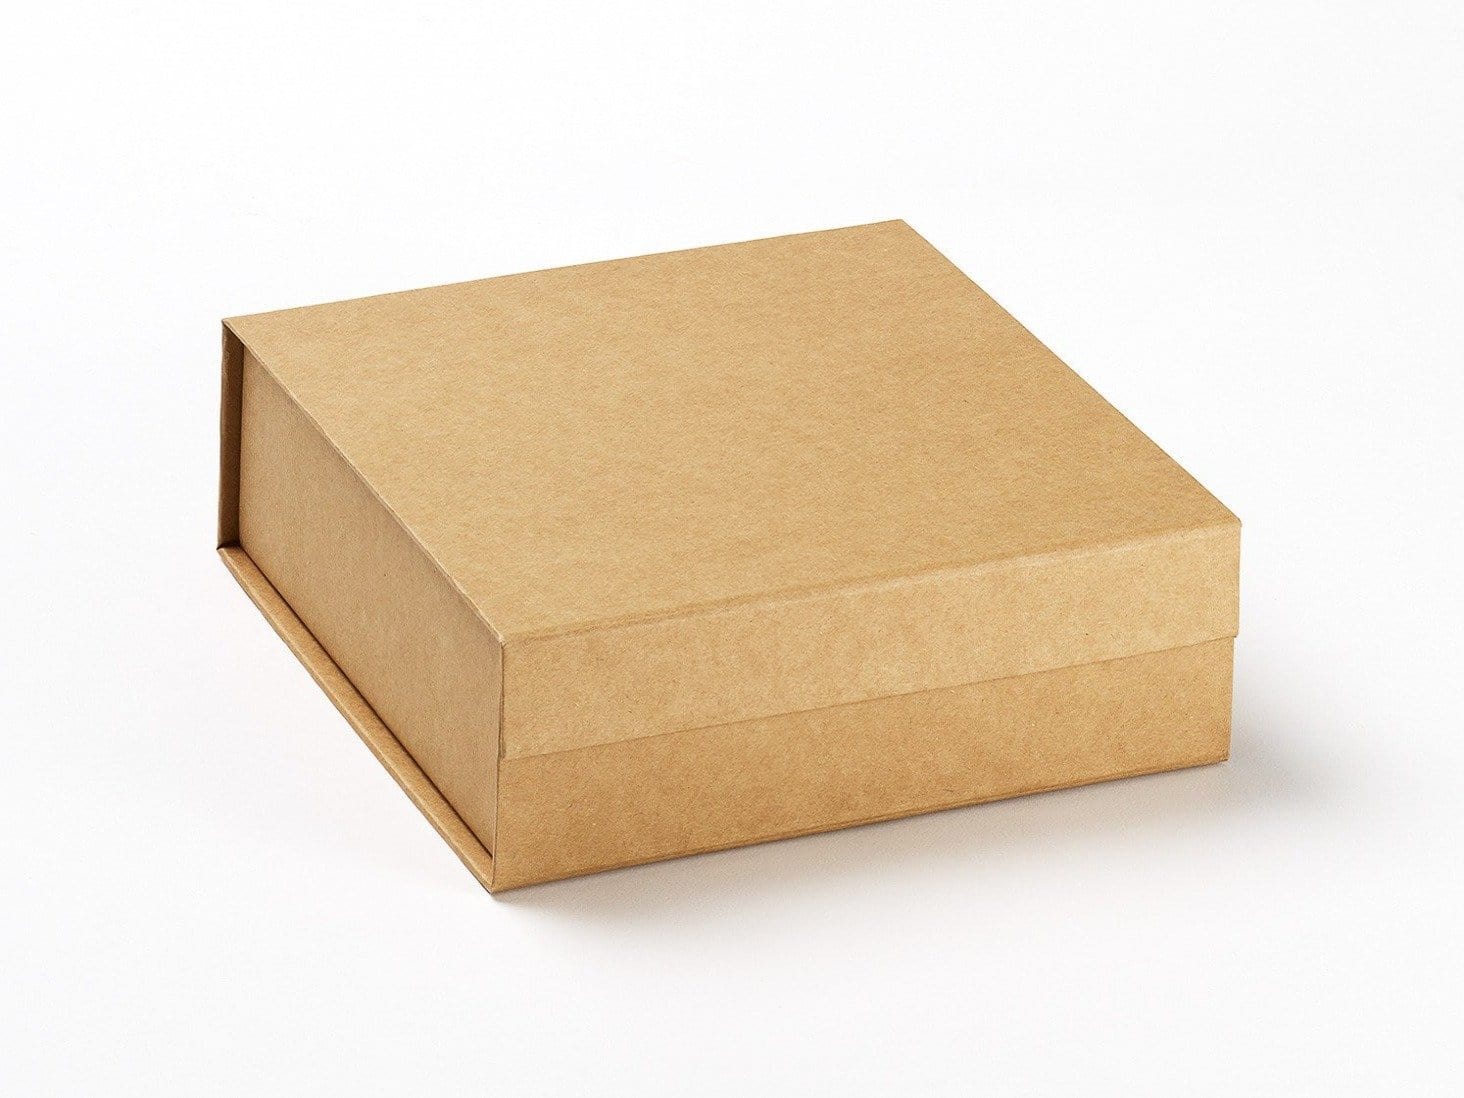 Large Natural Kraft Folding Gift Boxes with Magnetic Snap Shut Closure